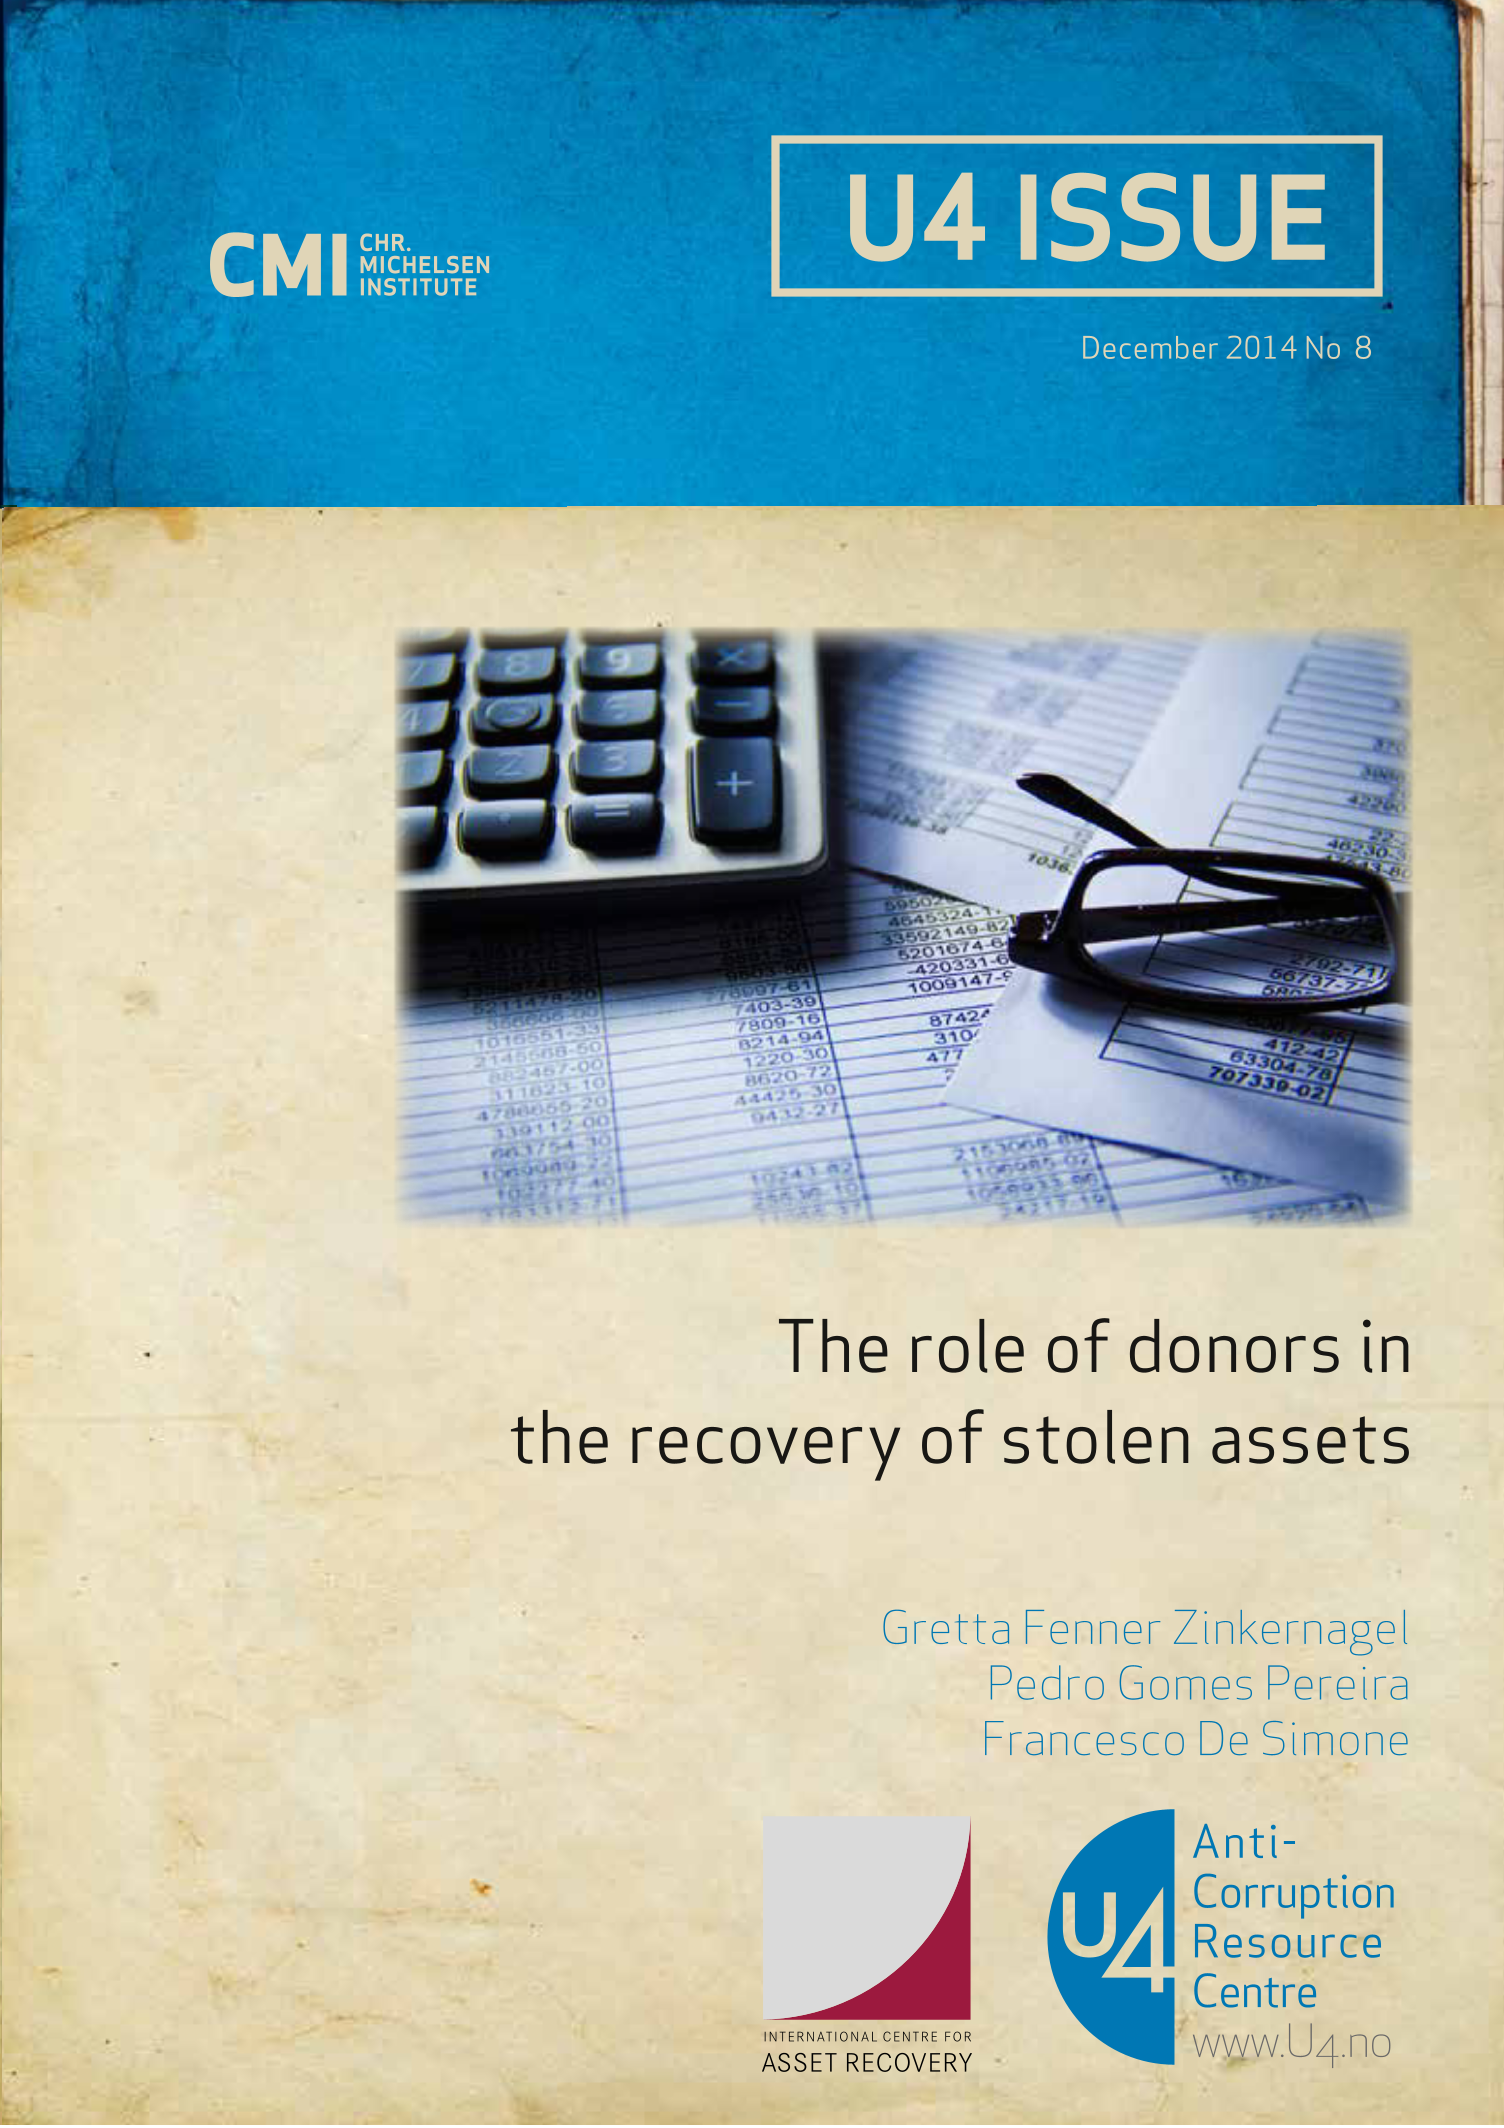 The role of donors in the recovery of stolen assets